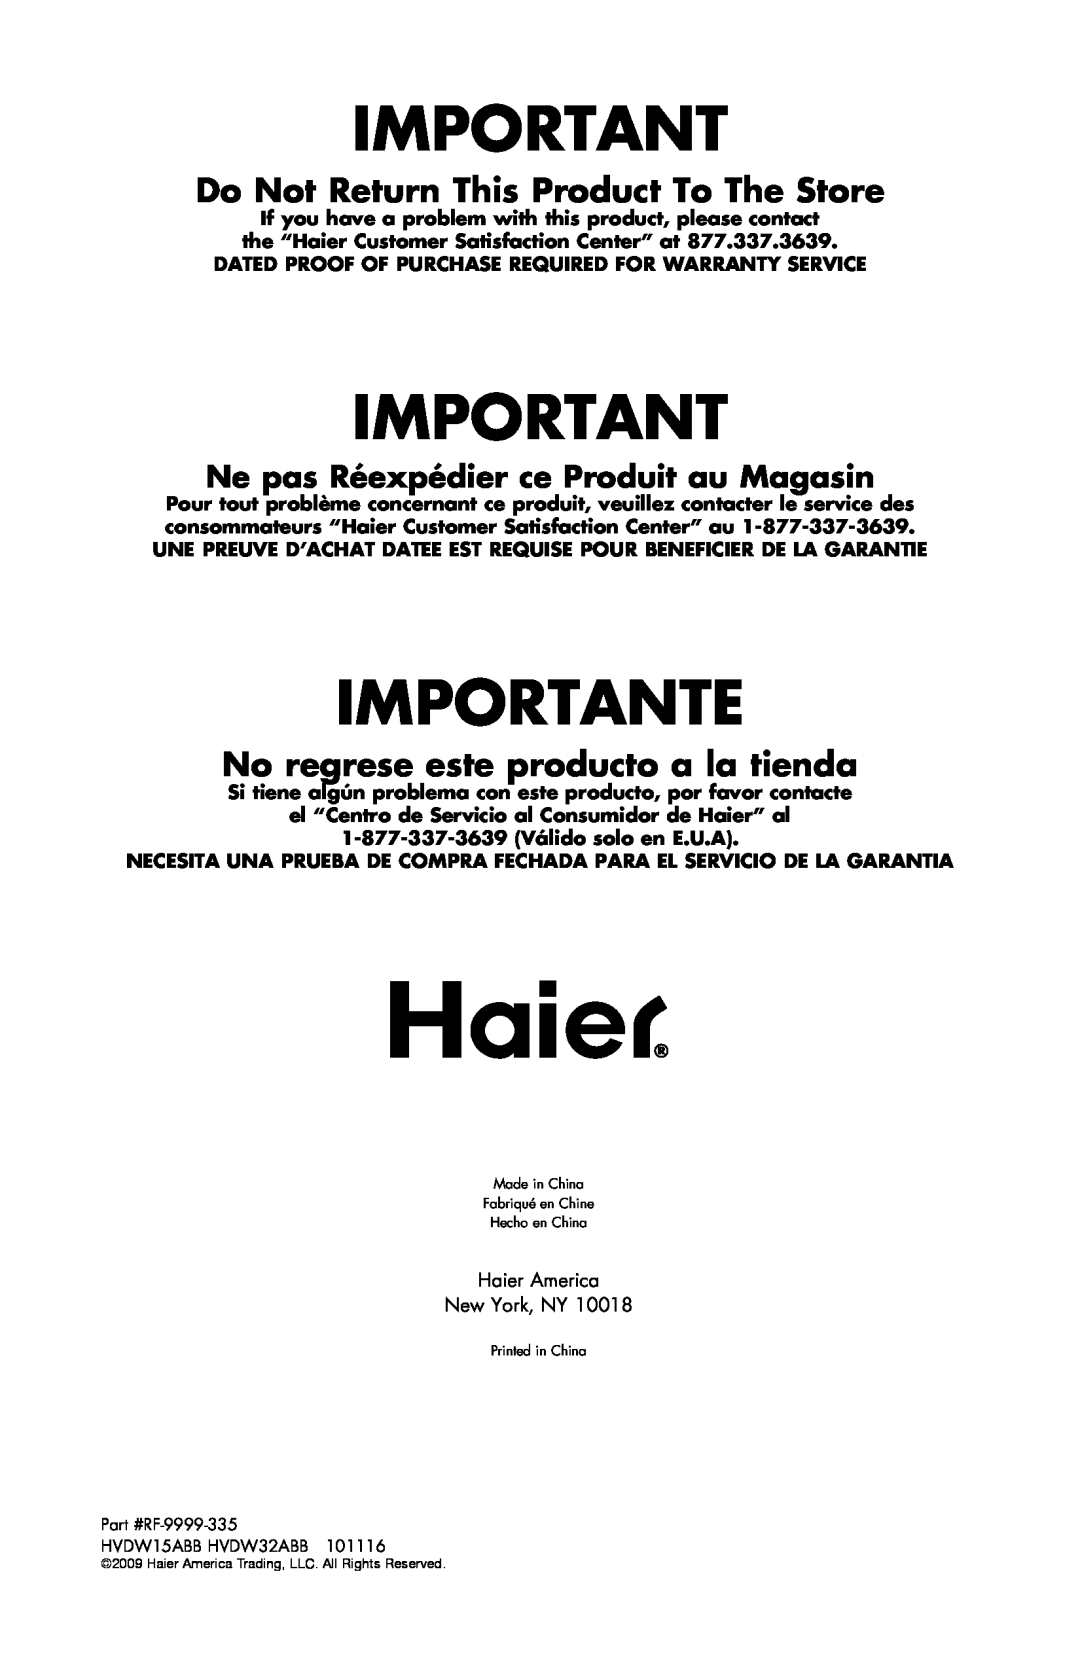 Haier HVDW32ABB, HVDW15ABB Importante, Do Not Return This Product To The Store, No regrese este producto a la tienda 